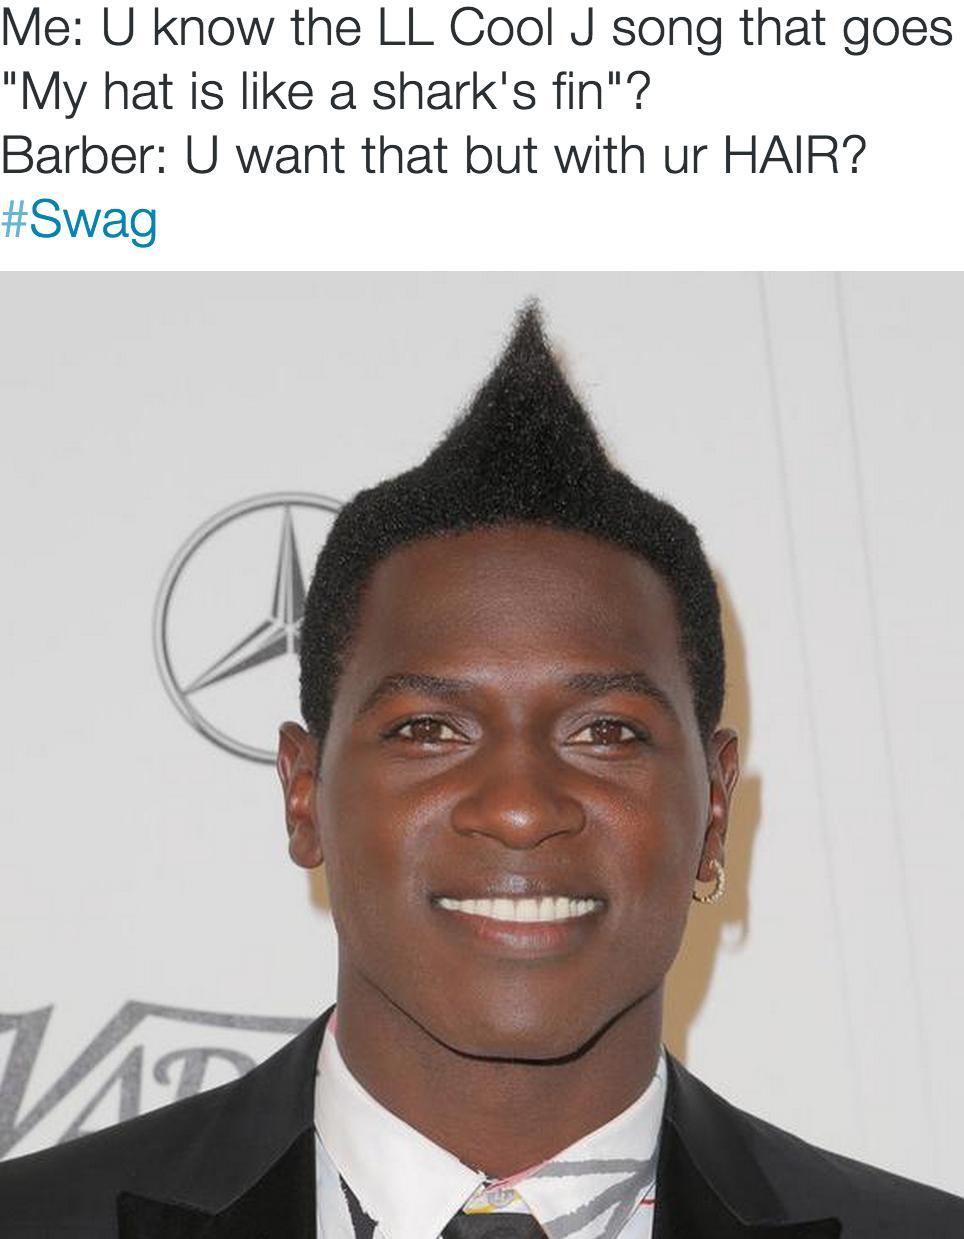 antonio brown blonde hair - Me U know the Ll Cool J song that goes "My hat is a shark's fin"? Barber U want that but with ur Hair?